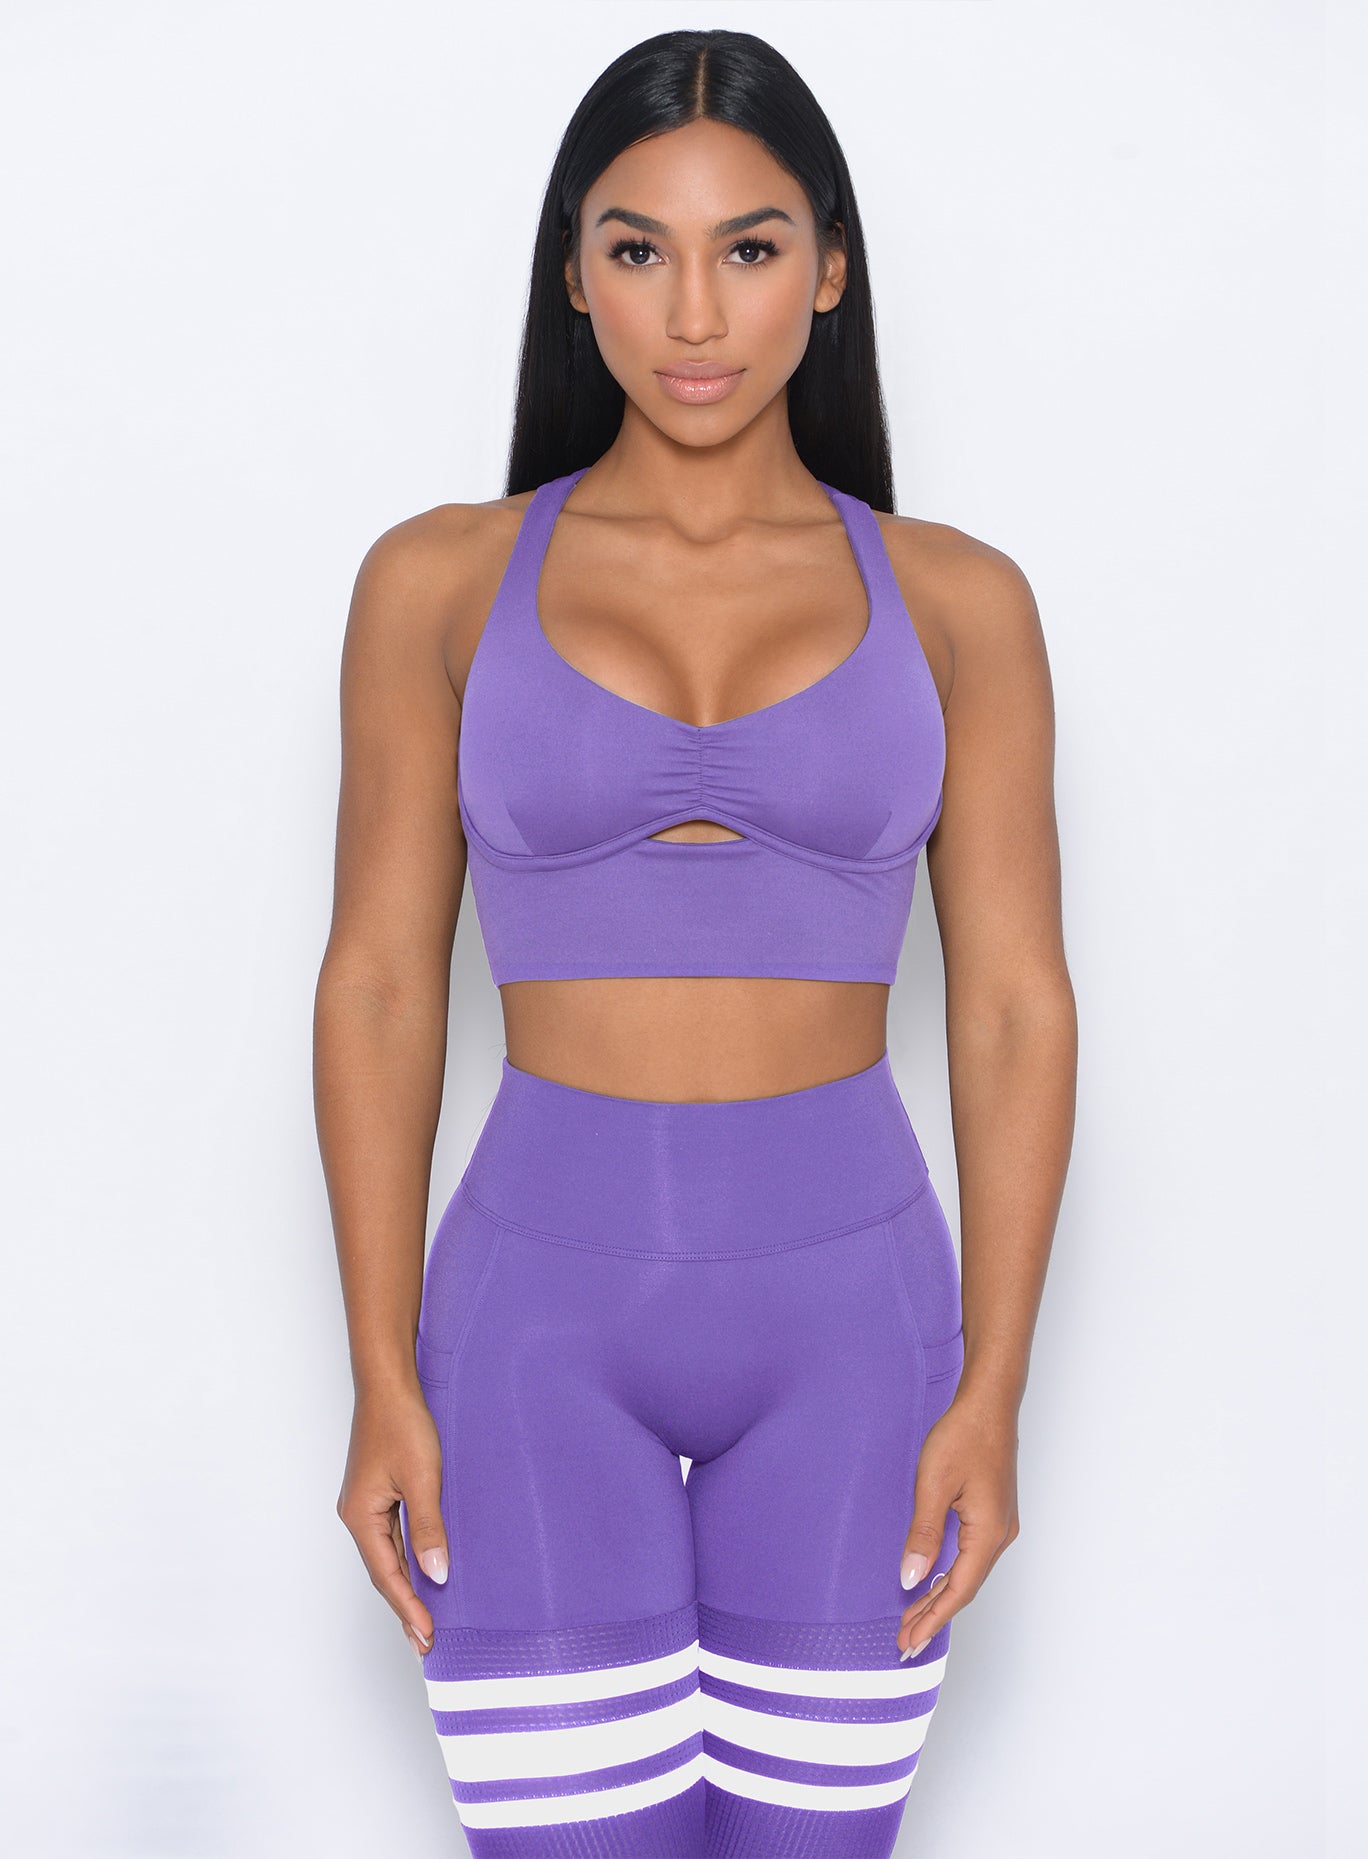 Front profile view of the model wearing our keyhole bralette in royal purple color and a matching leggings